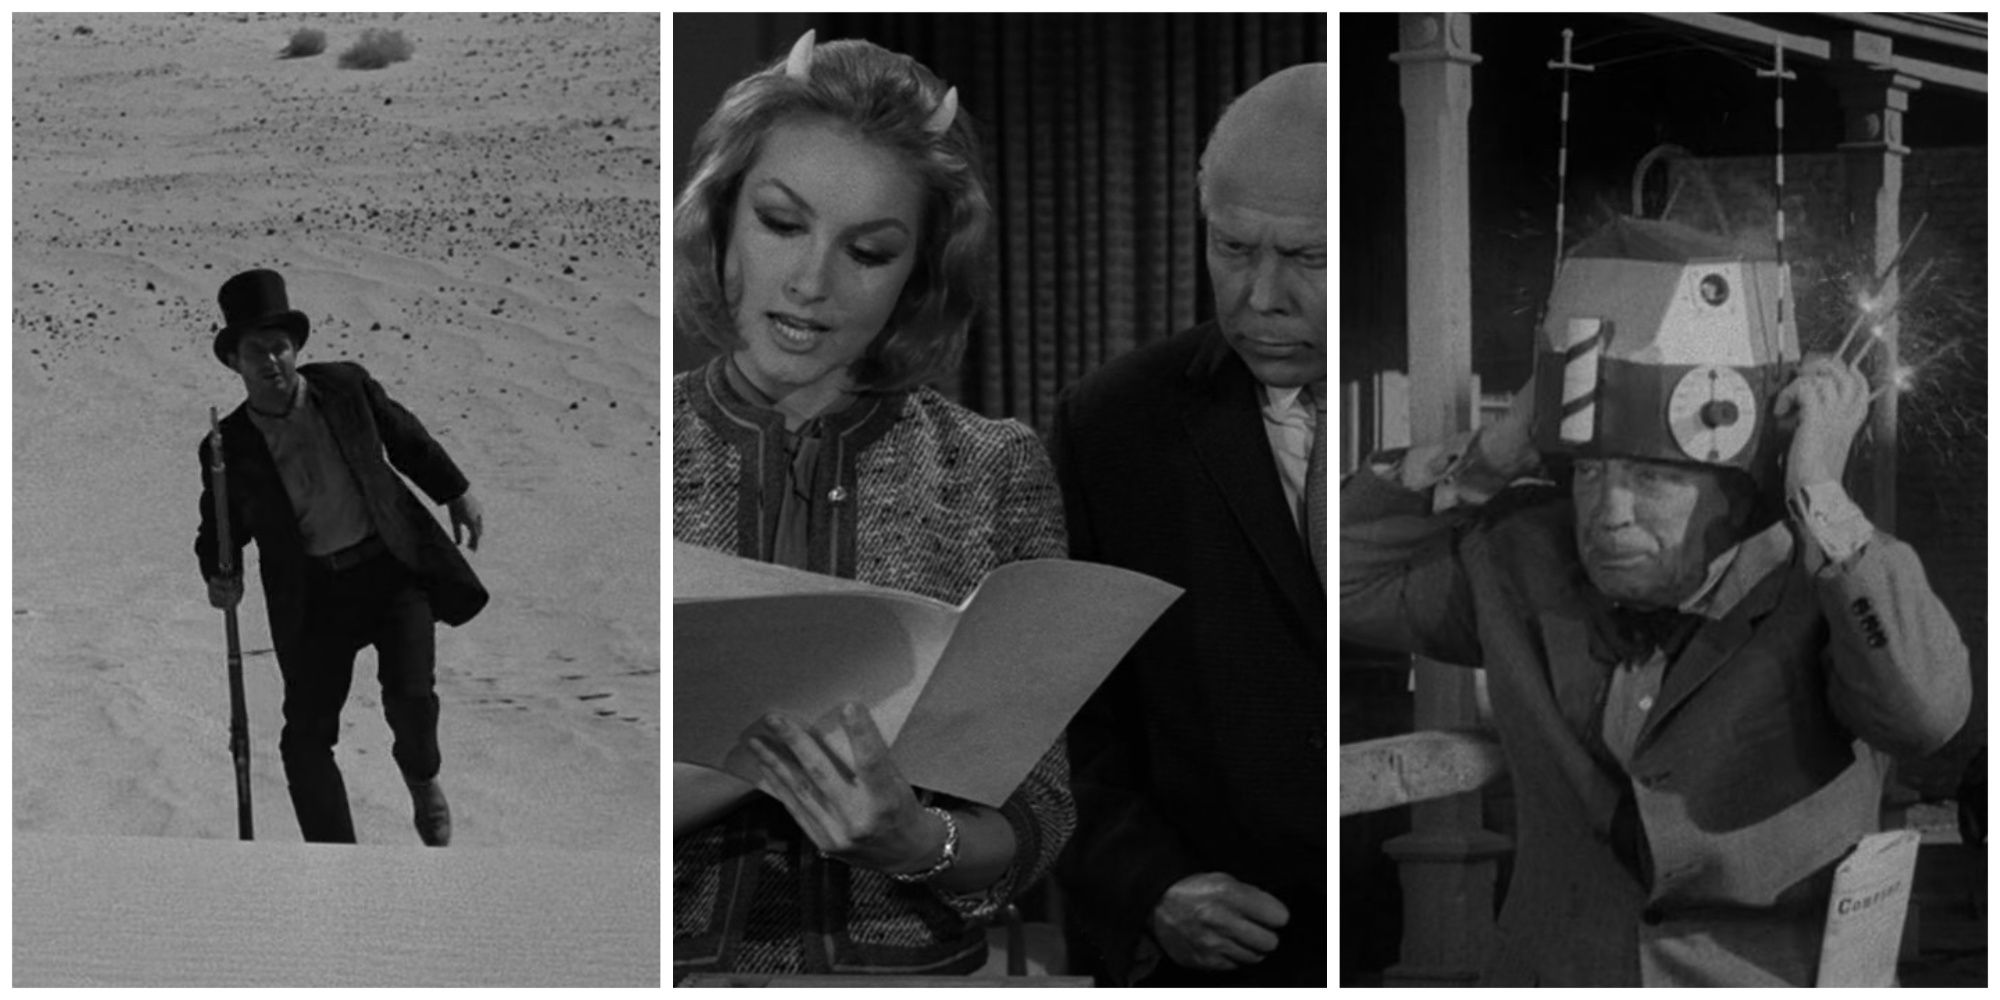 Split image showing shots from three Twilight Zone episodes (A Hundred Yards Over The Rim, Of Late I Think Of Cliffordville, and Once Upon A Time).